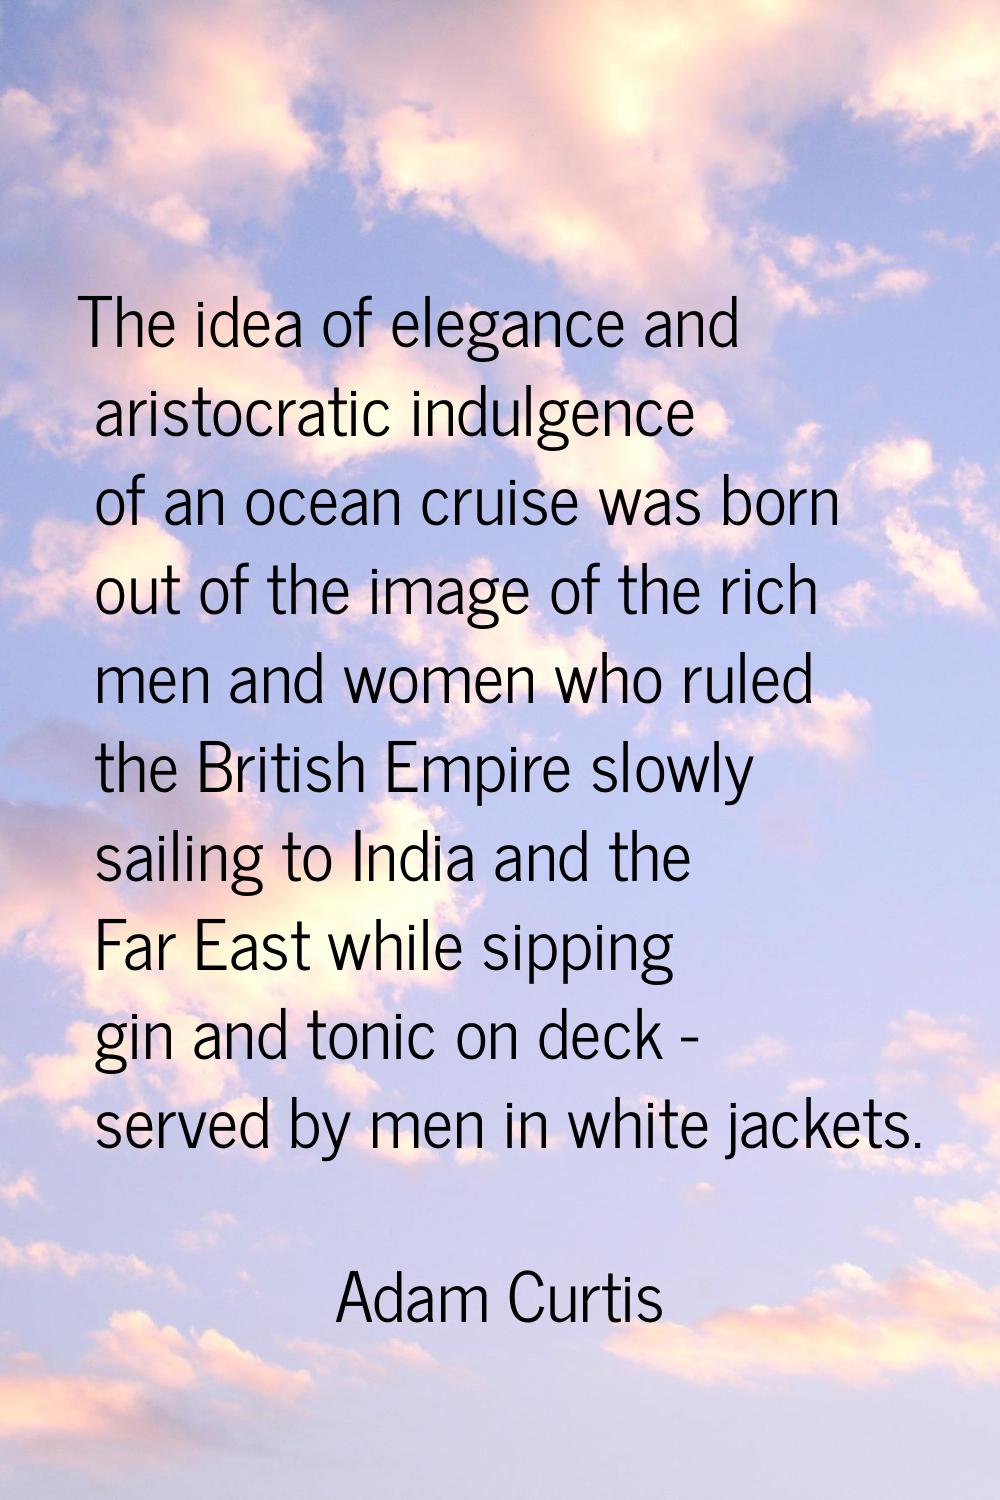 The idea of elegance and aristocratic indulgence of an ocean cruise was born out of the image of th